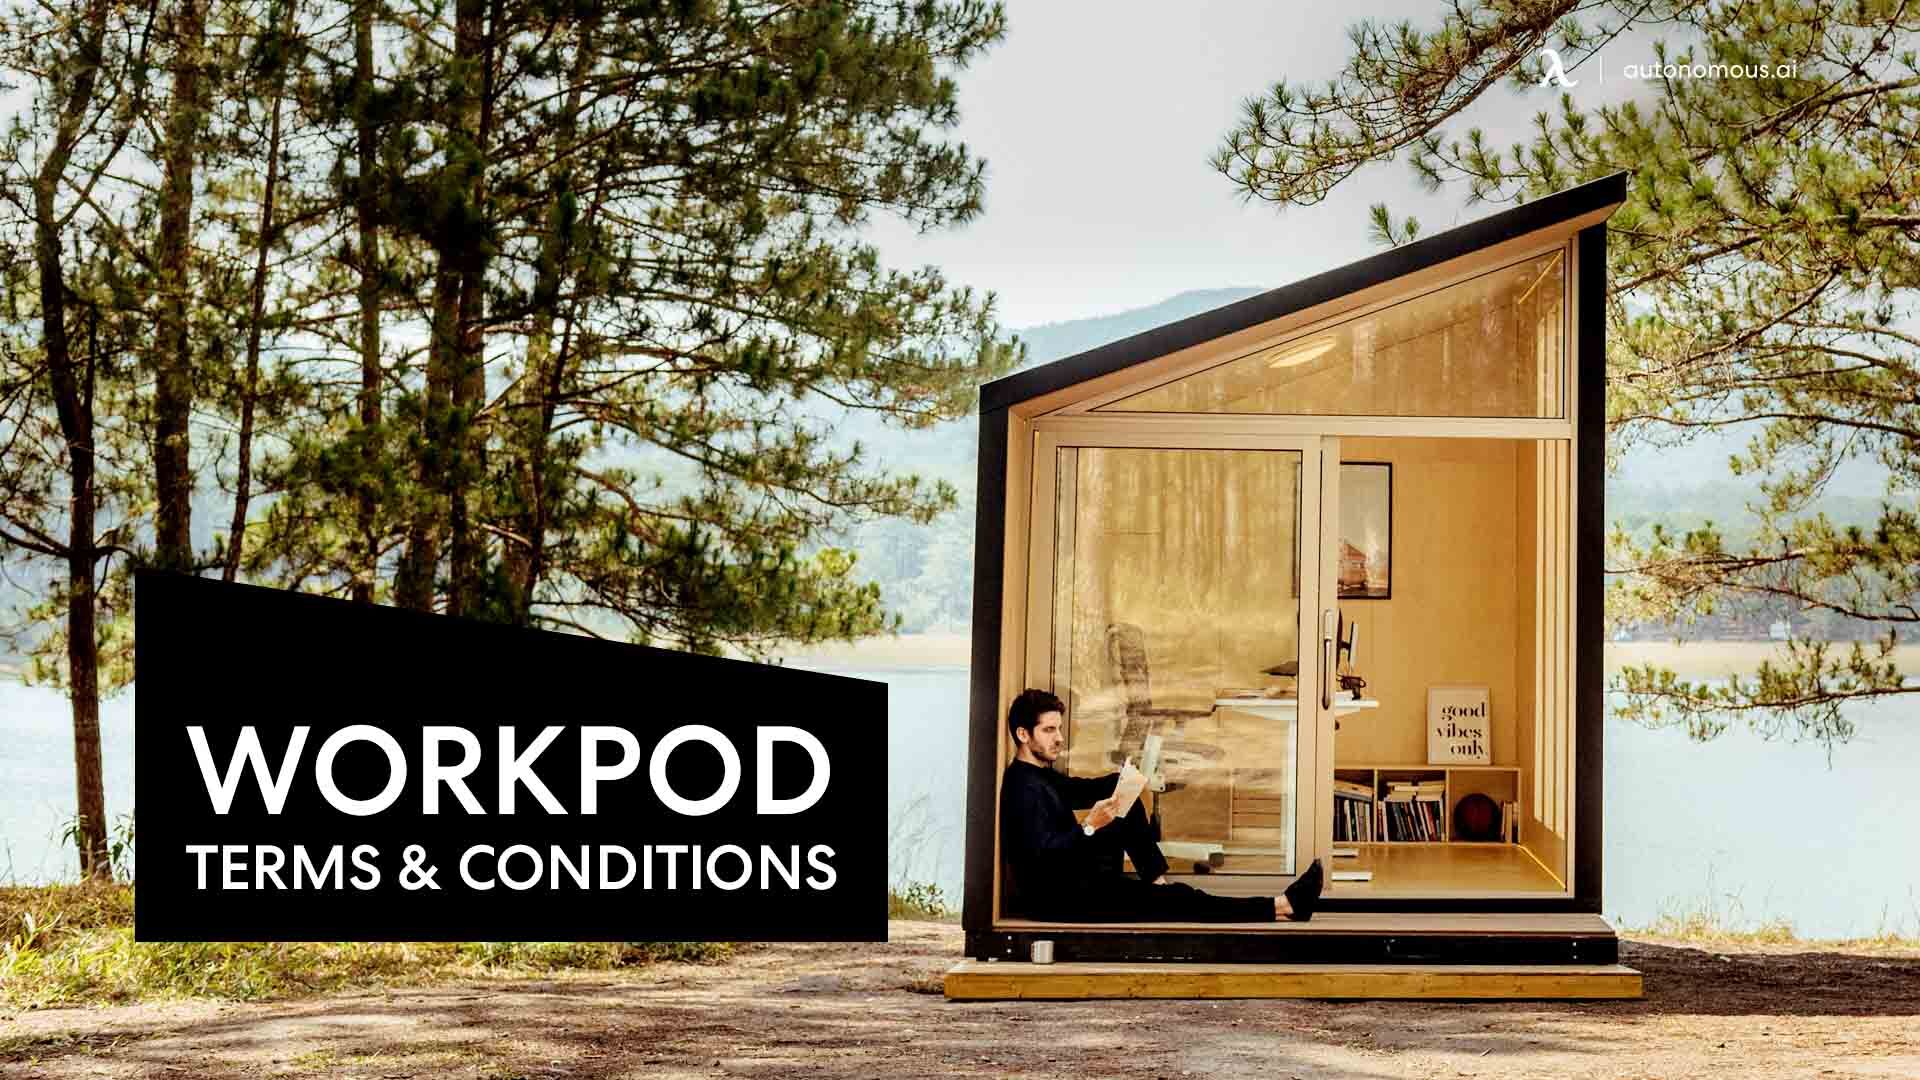 WorkPod - Terms & Conditions